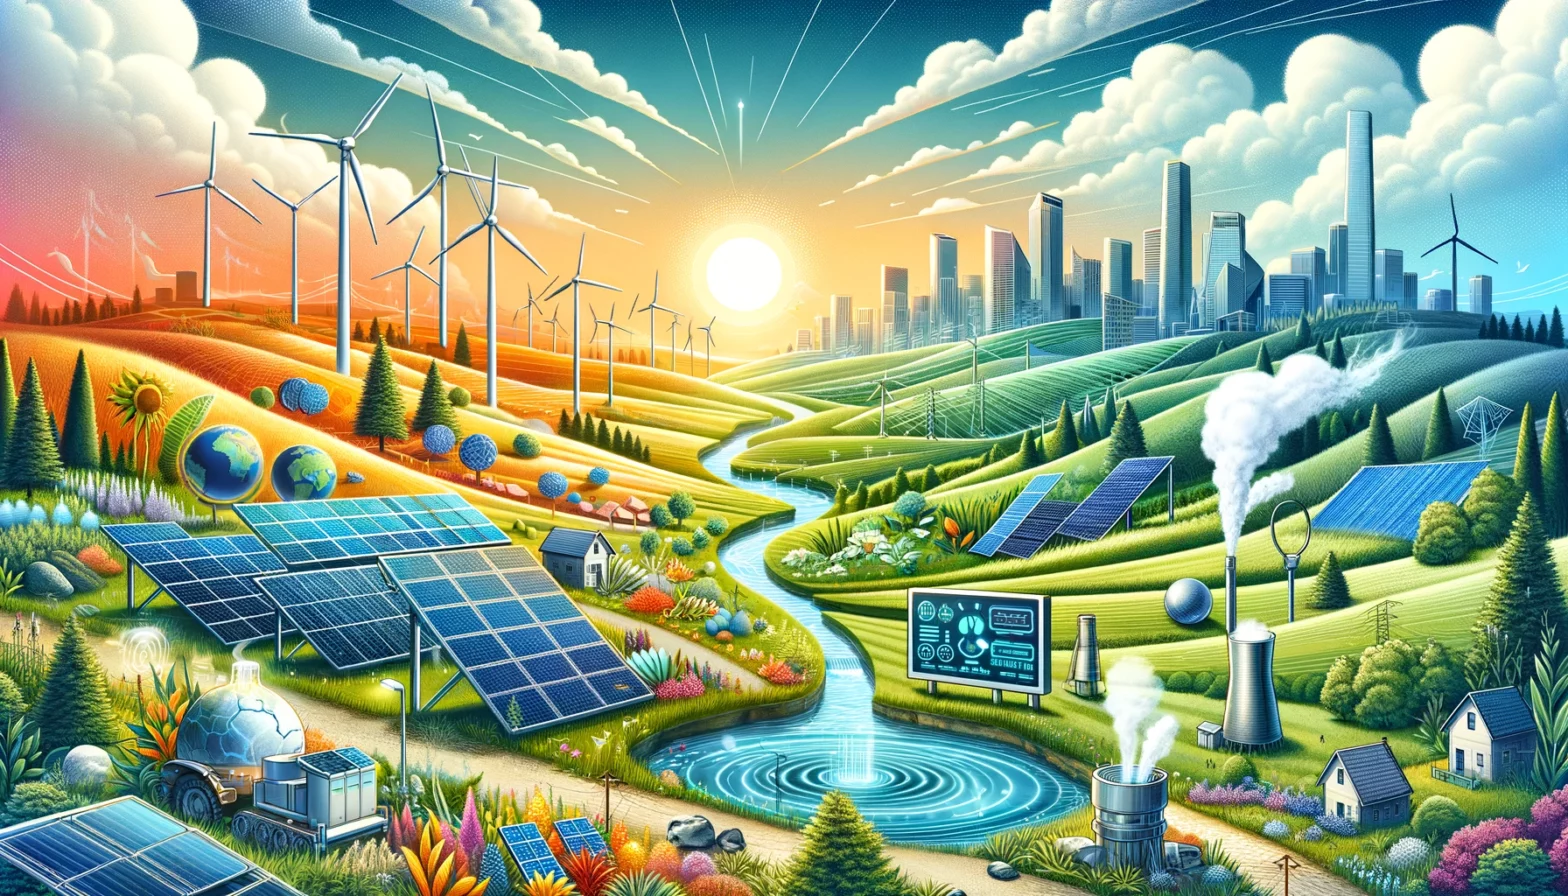 Illustration of sustainable energy solutions including solar panels, wind turbines, a geothermal plant, and a smart grid against a city skyline.